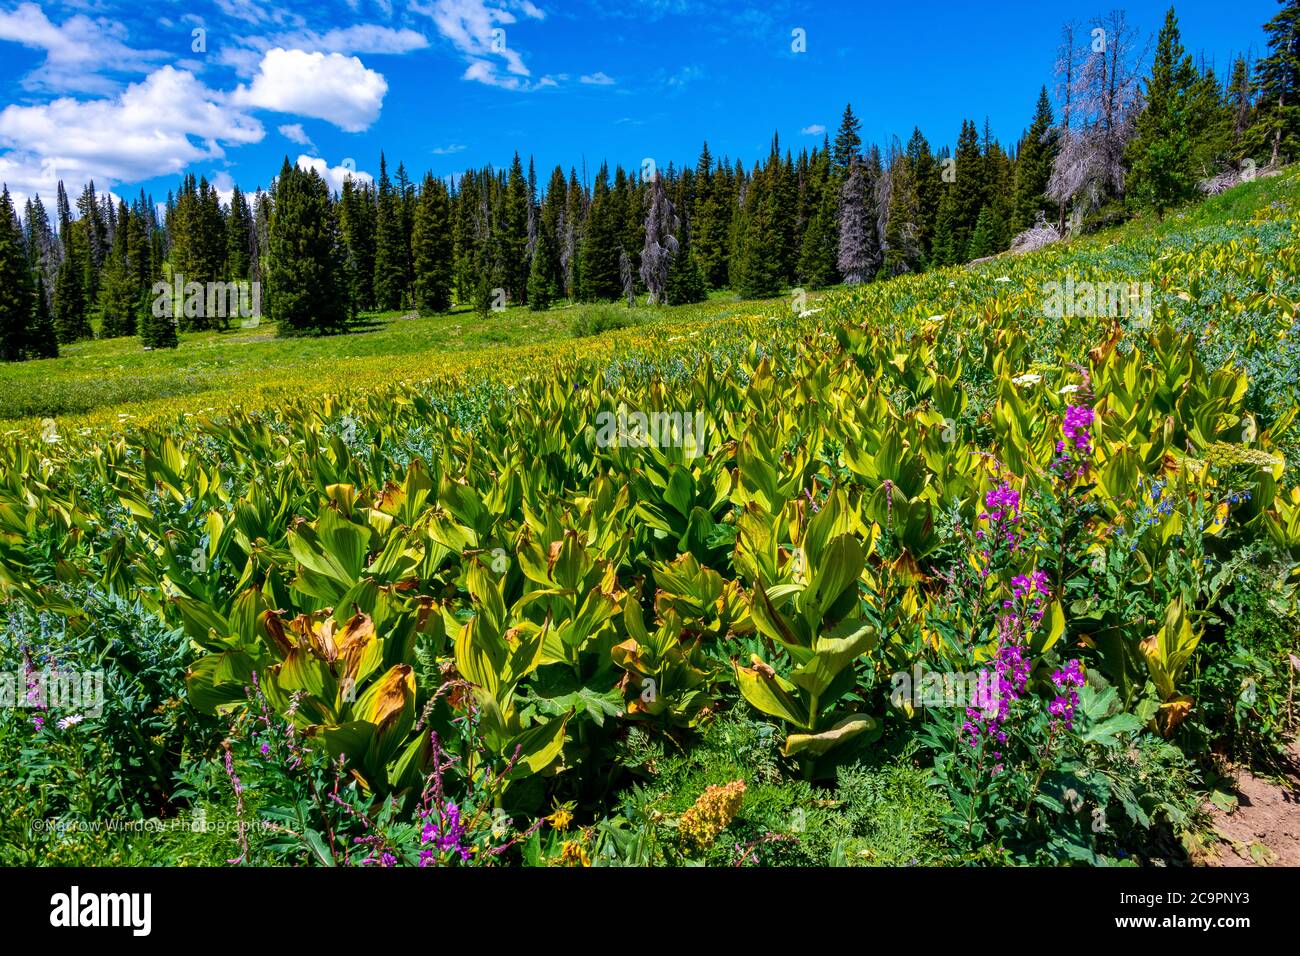 Wildflowers and Rabbit Ears Rock Formation Stock Photo